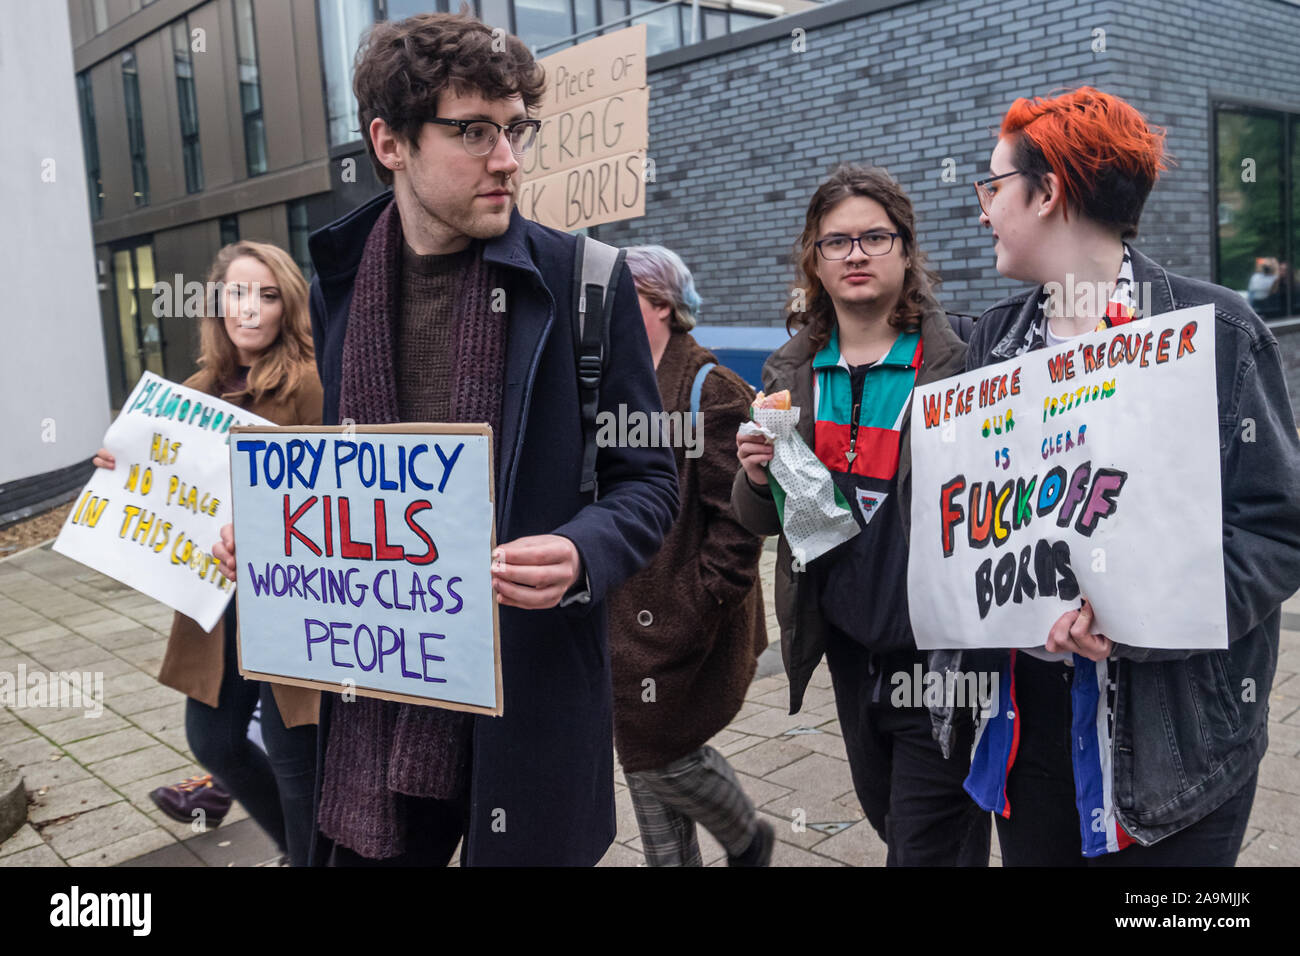 London, UK. 16th November 2019. A man holds a poster 'Tory Policy Kills WOrking Class People'. Protesters from FCKBoris at Brunel University in Uxbridge  urge everyone to register and vote against Boris Johnson and kick him out for his racist, elitist politics.  Johnson had a majority of just over 5 thousand in 2017 and Labour candidate Ali Milani has strong hopes of beating him and the other 10 candidates. Peter Marshall/Alamy Live News Stock Photo